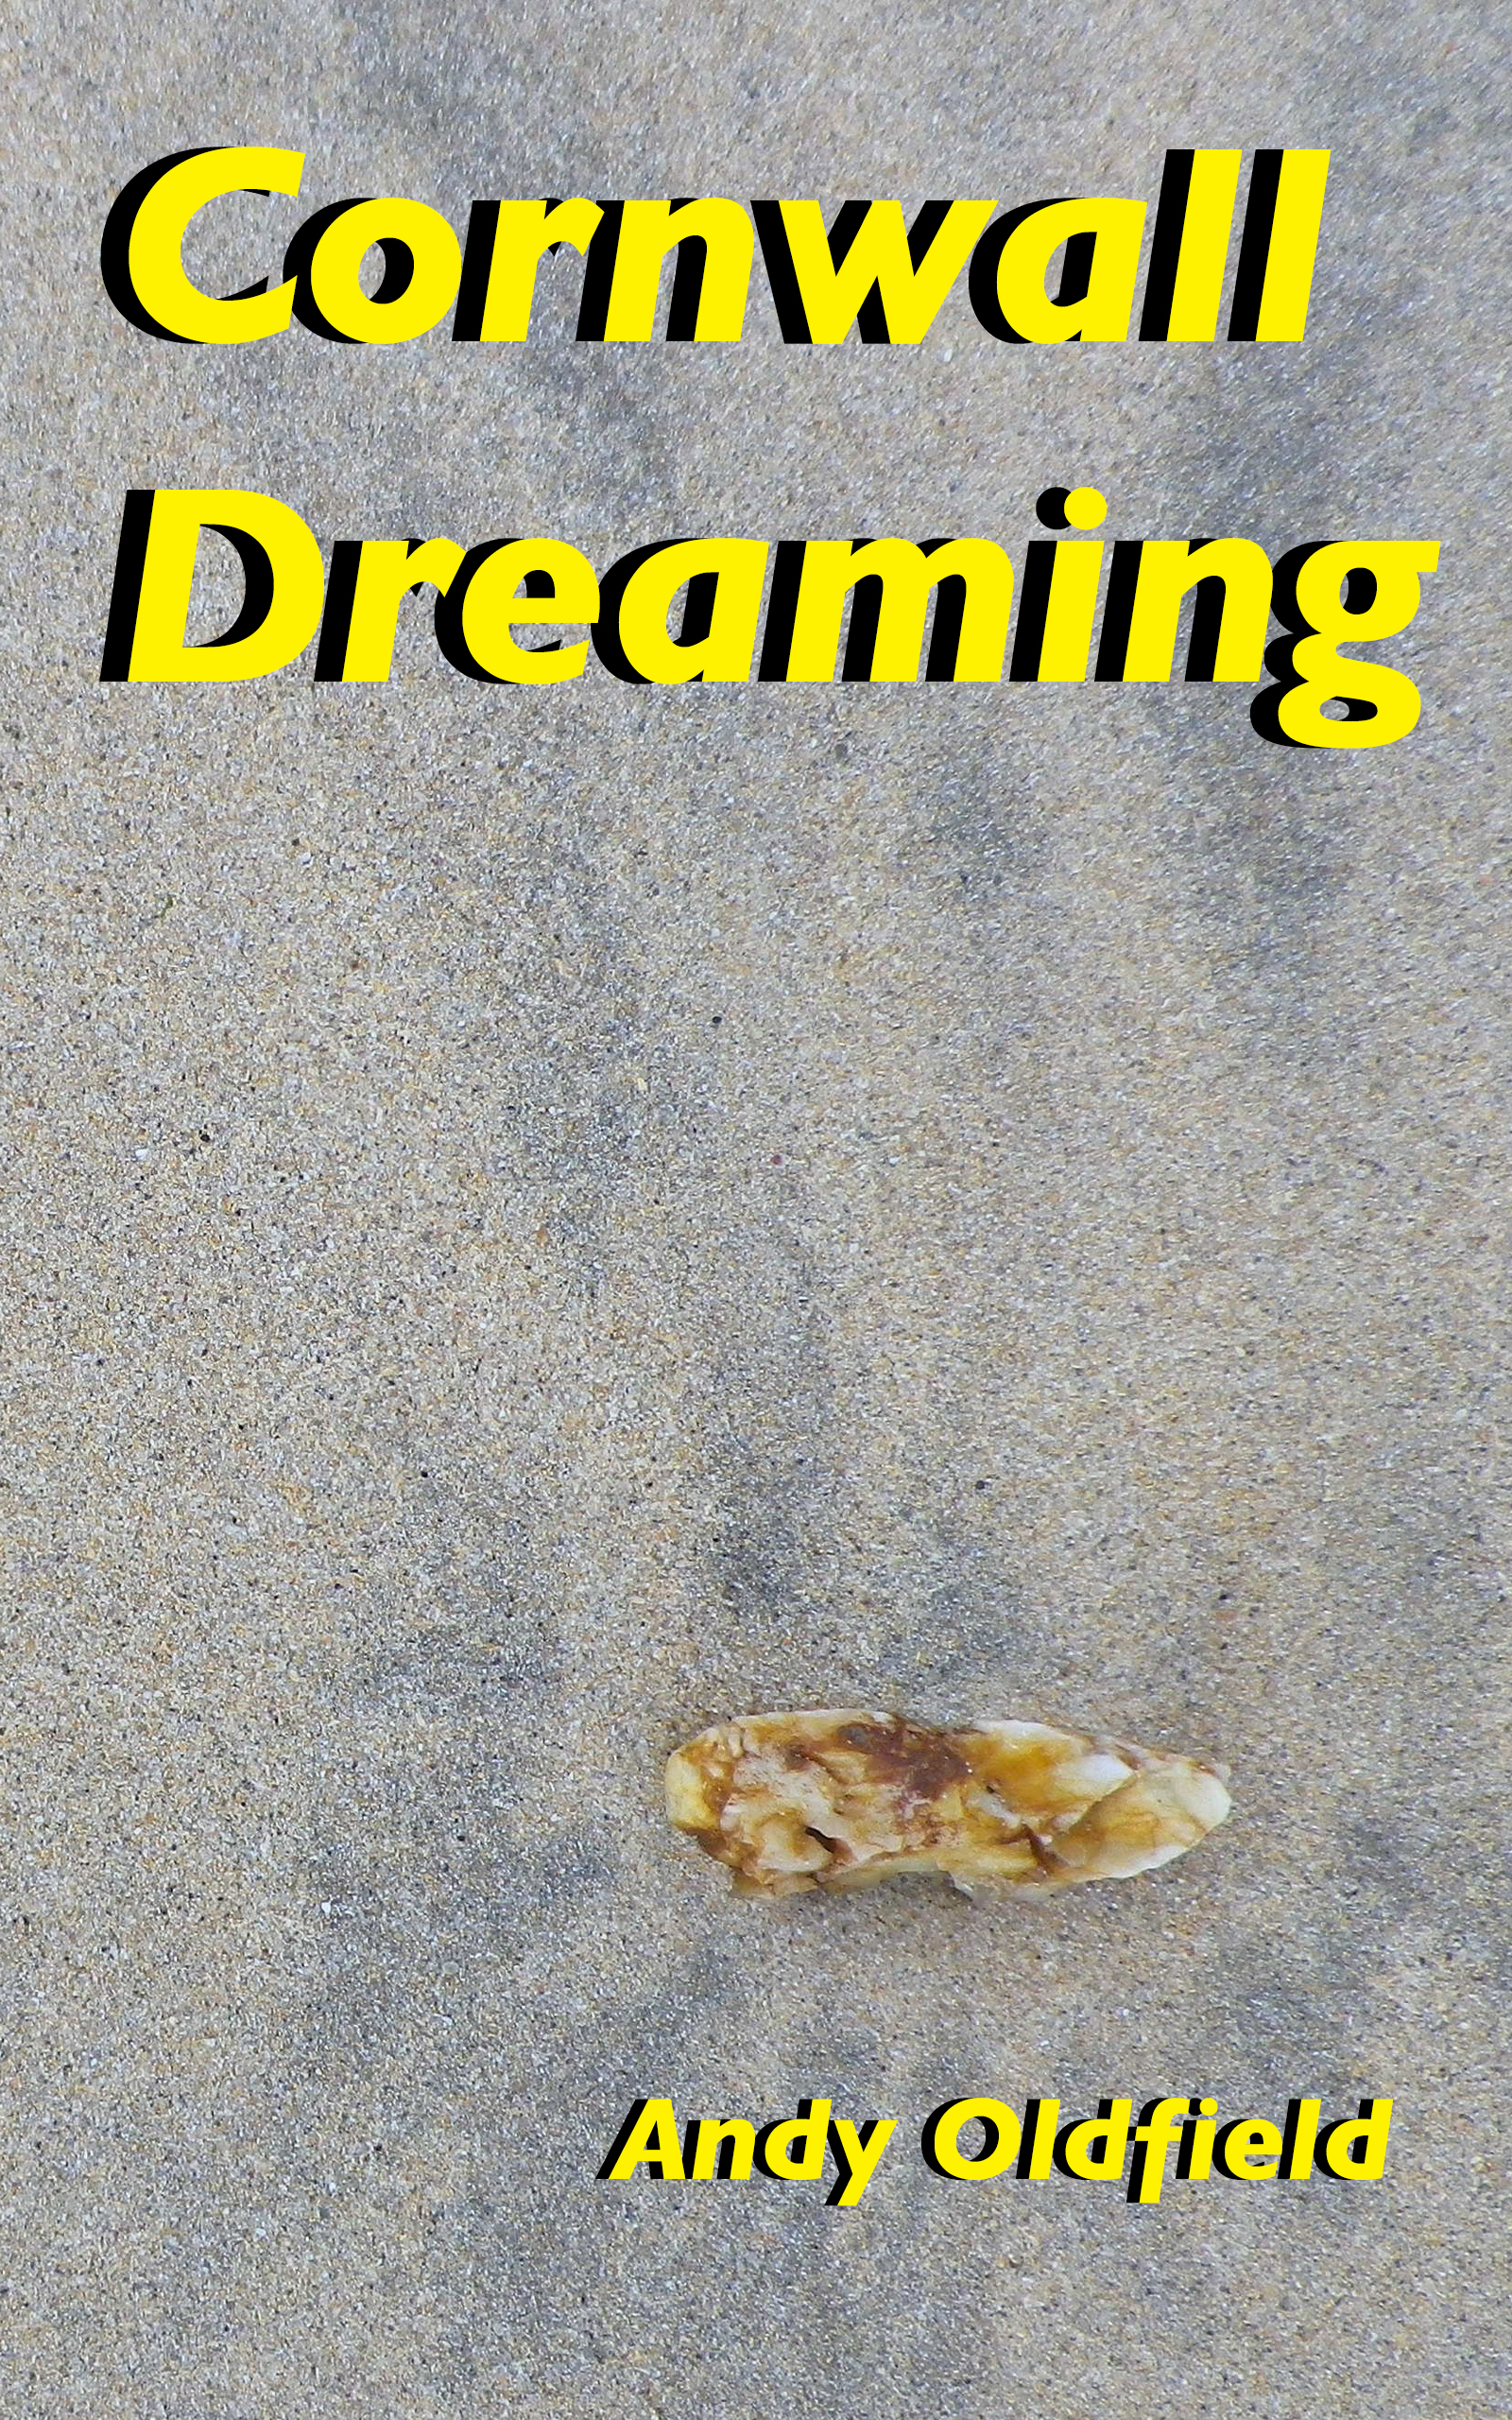 Cornwall Dreaming
                        cover